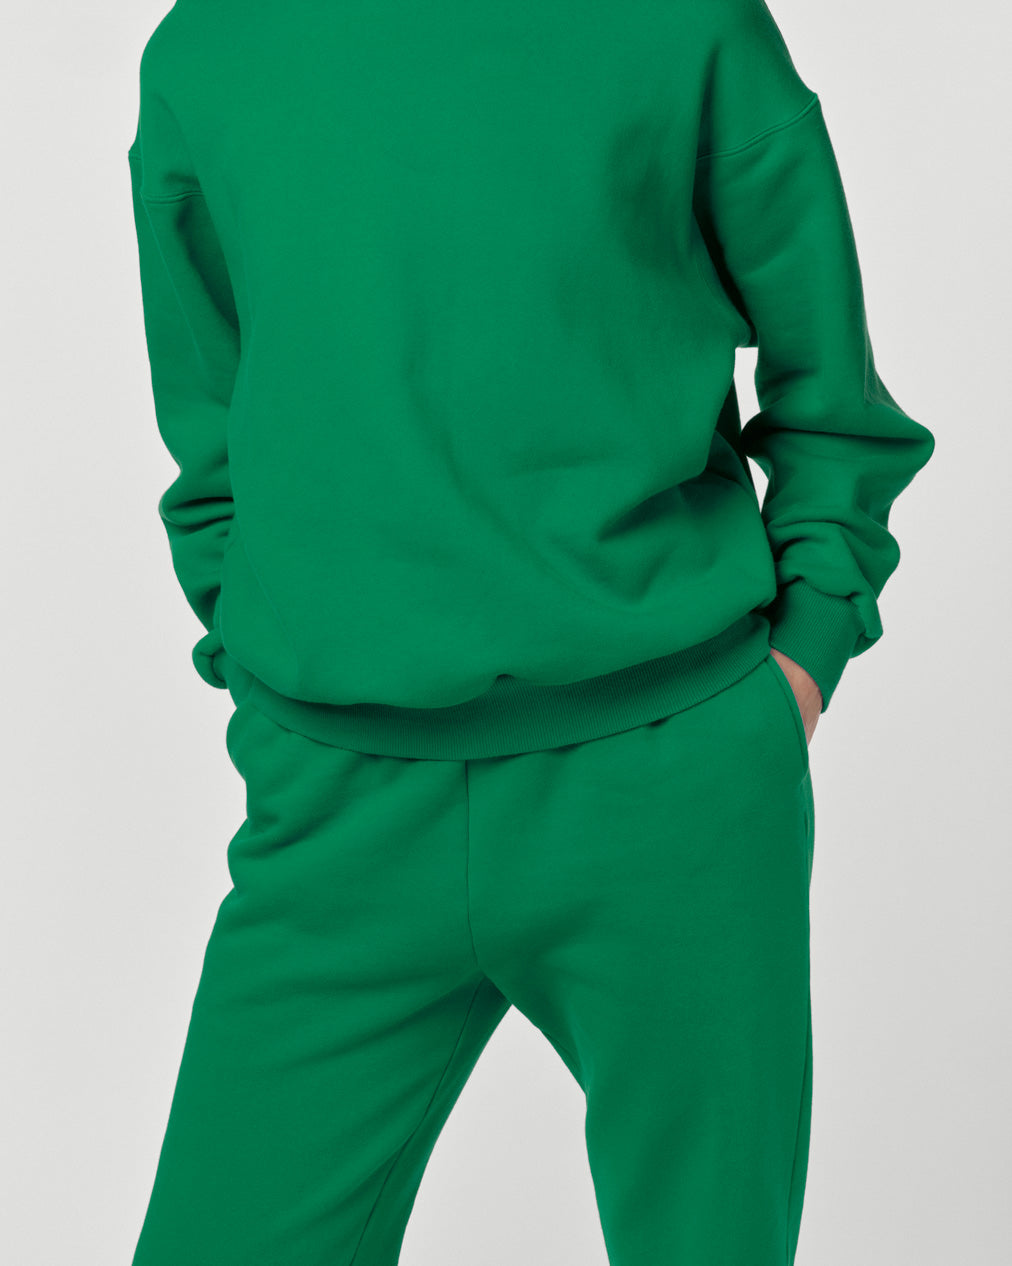 CPS.05_Sweater-Green_Unisex